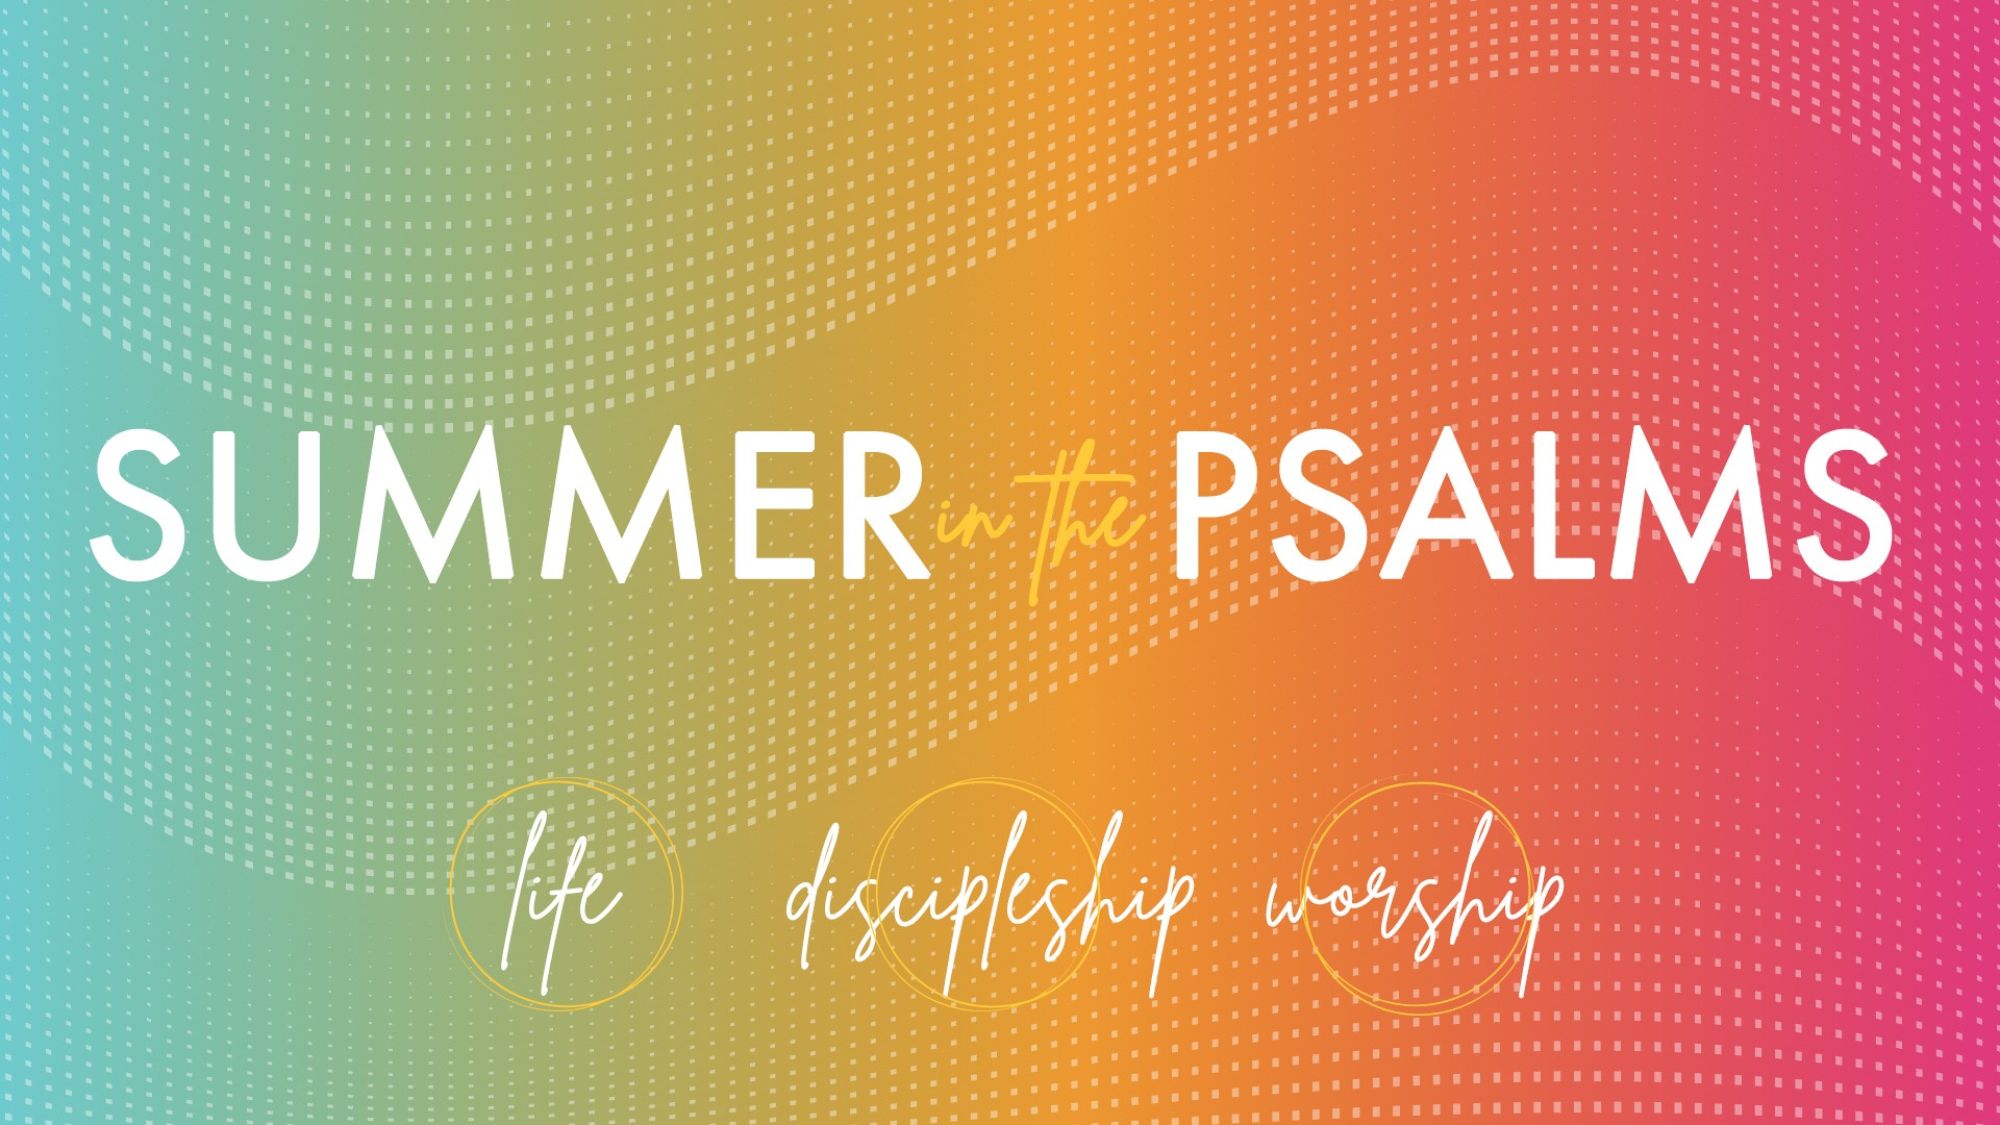 Summer in the Psalms